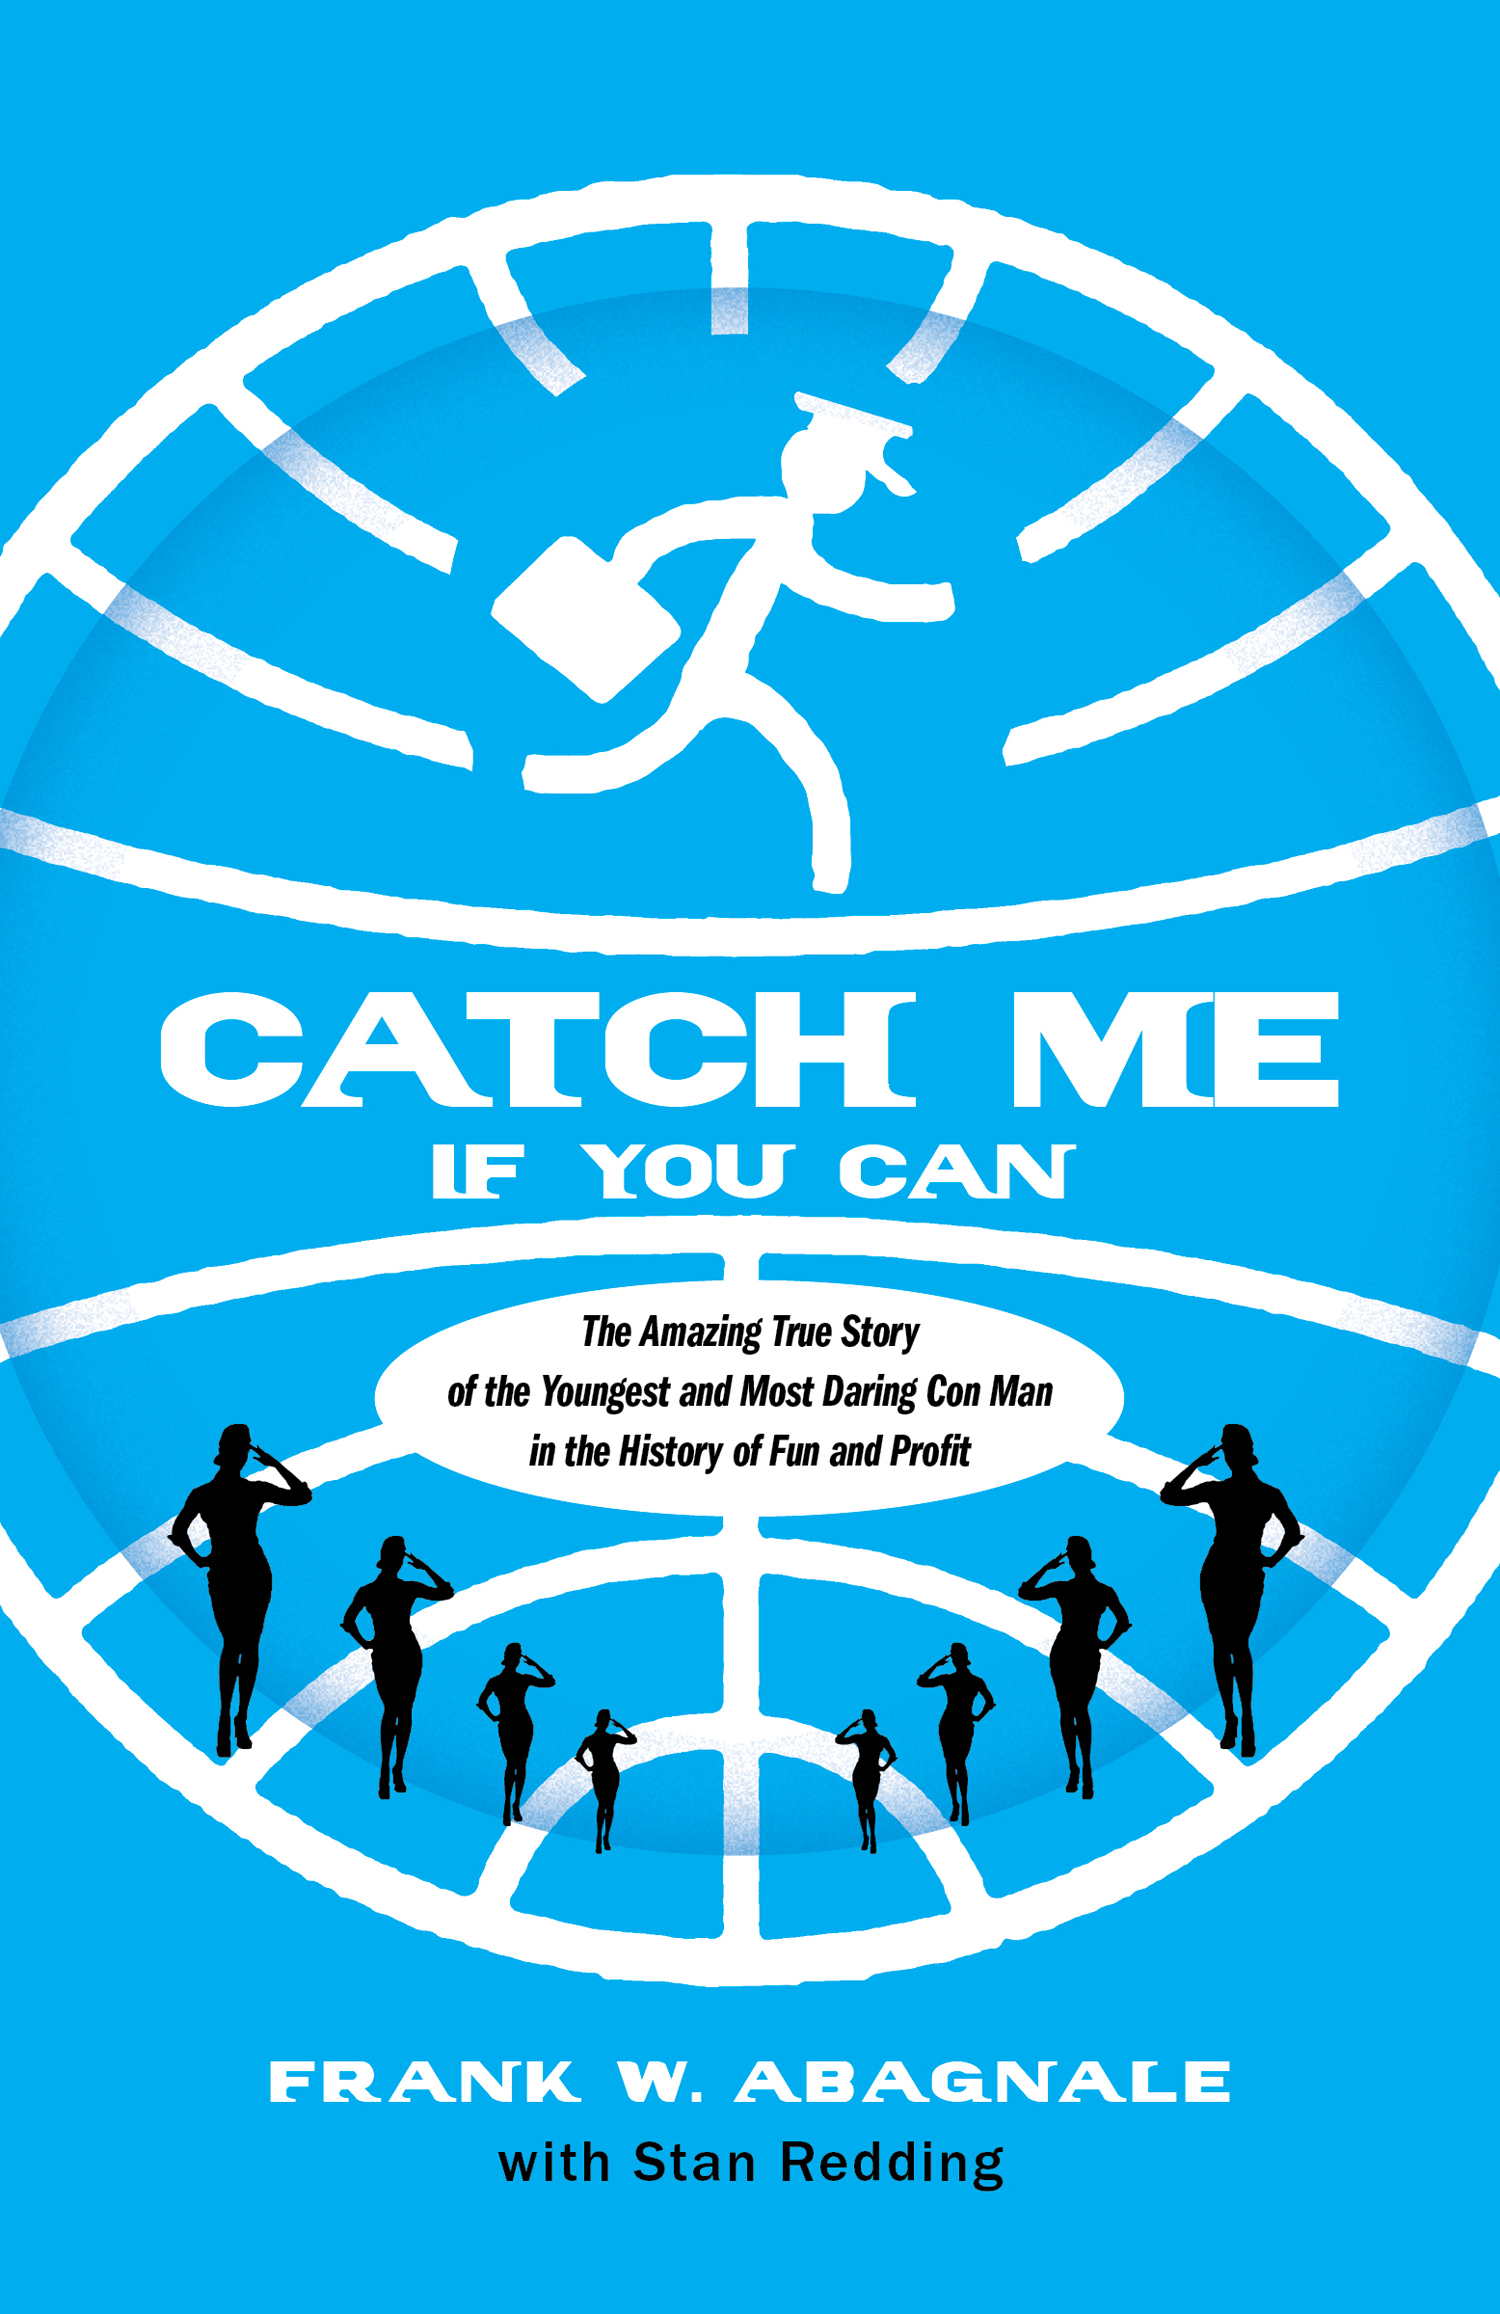 CATCH-ME-IF-YOU-CAN-comp-ss6.jpg